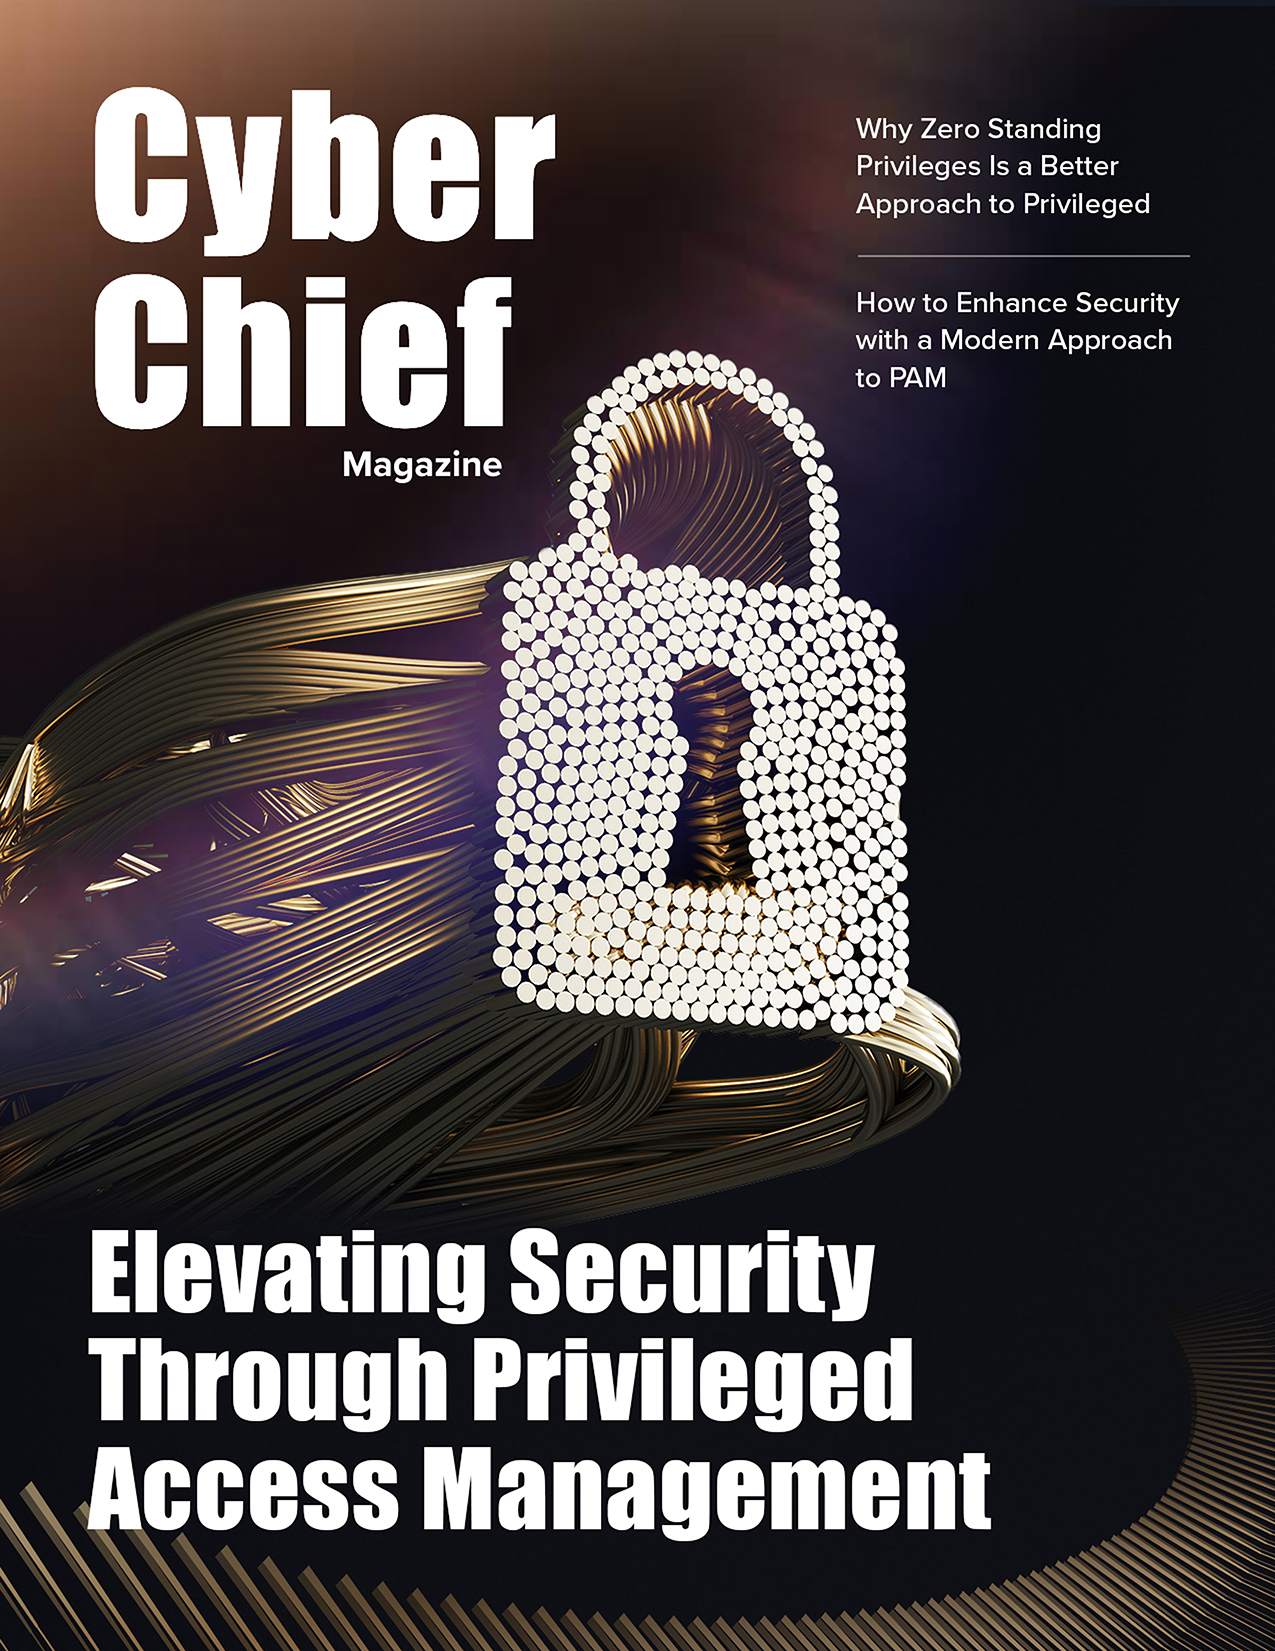 Elevating Security Through Privileged Access Management